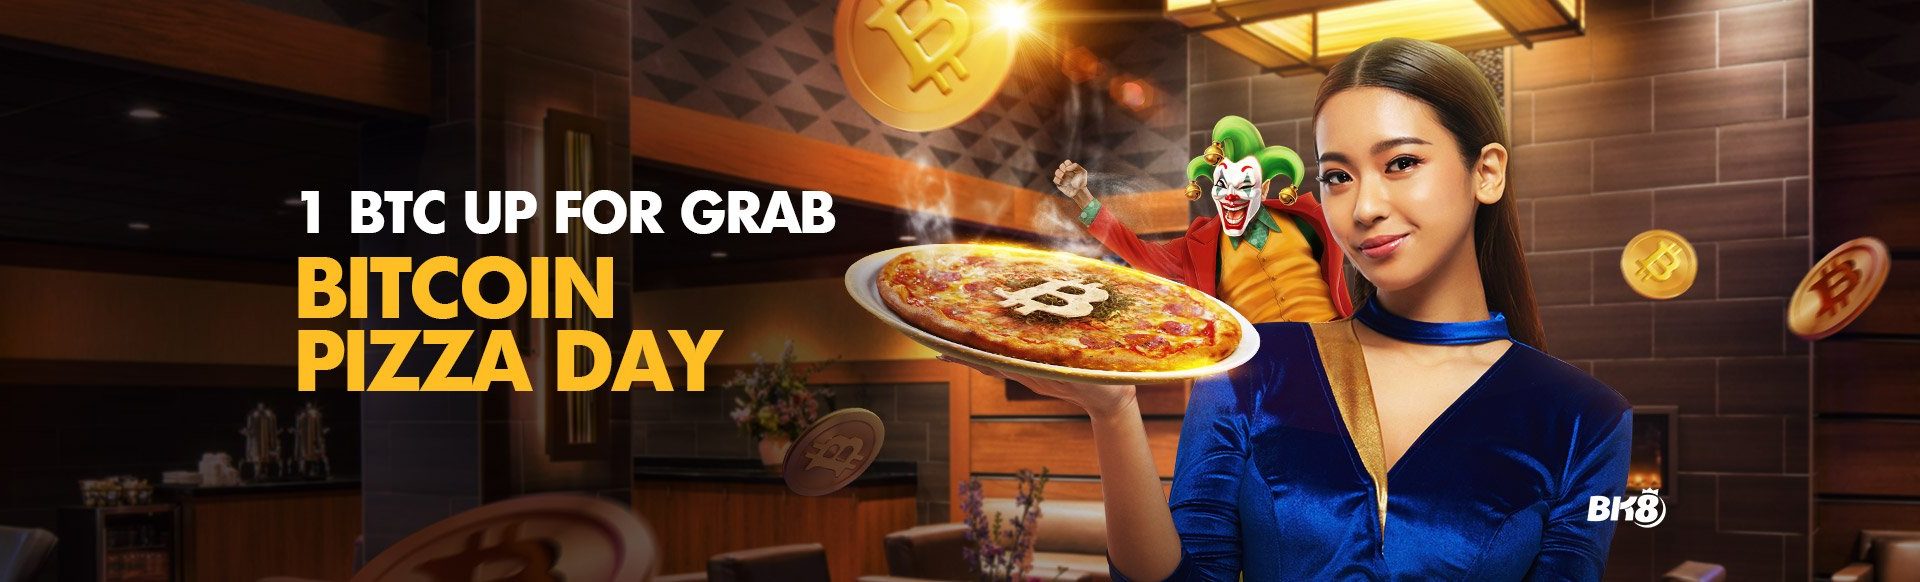 1-BTC-For-Grab-BitCoin-Pizza-Day